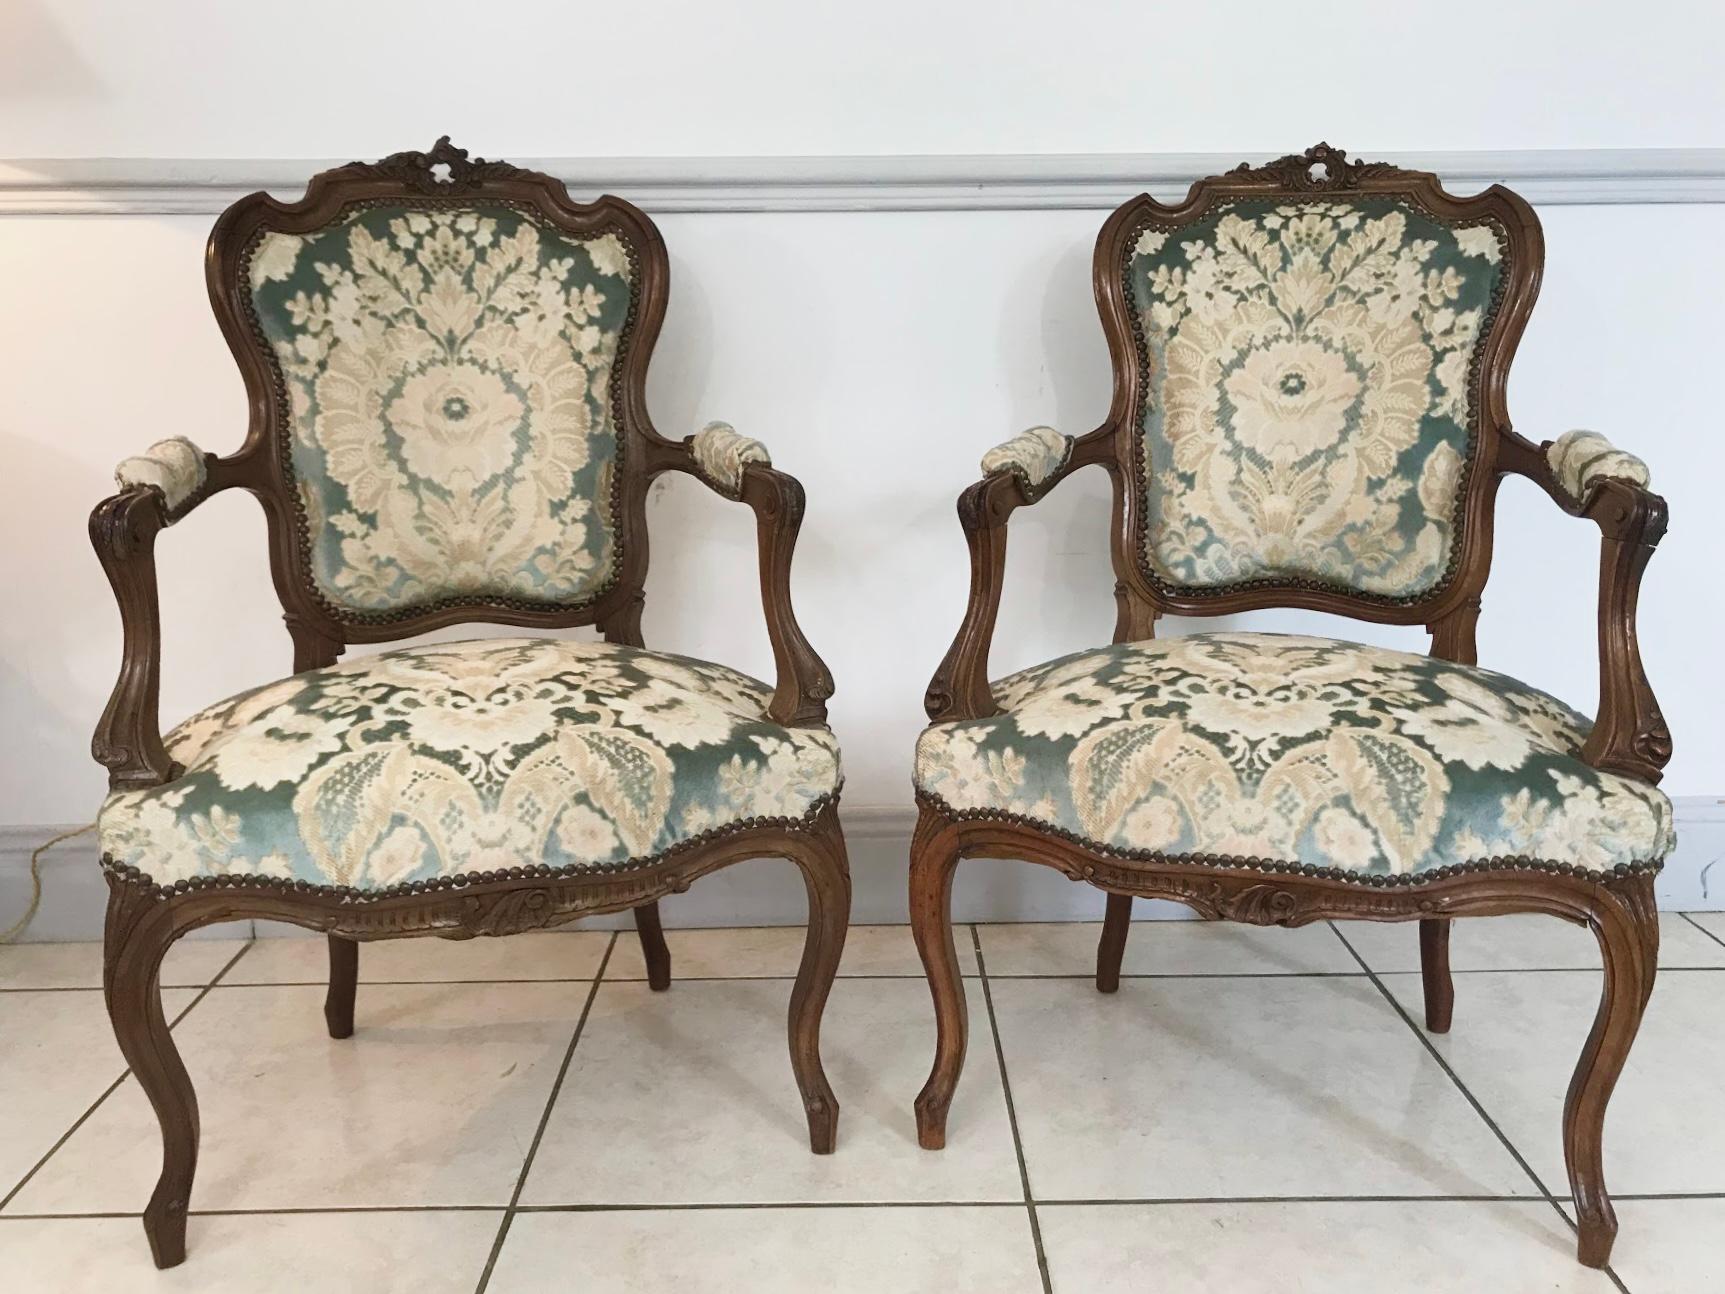 Beautifull Louis 15 style cabriolet Armchair dating from the Napoléon III period. Its 4 legs are curved. The armrests are sculpted bringing a certain elegance. The top of the backrest is also carved with a kind of plant scroll forming a circle. 
It